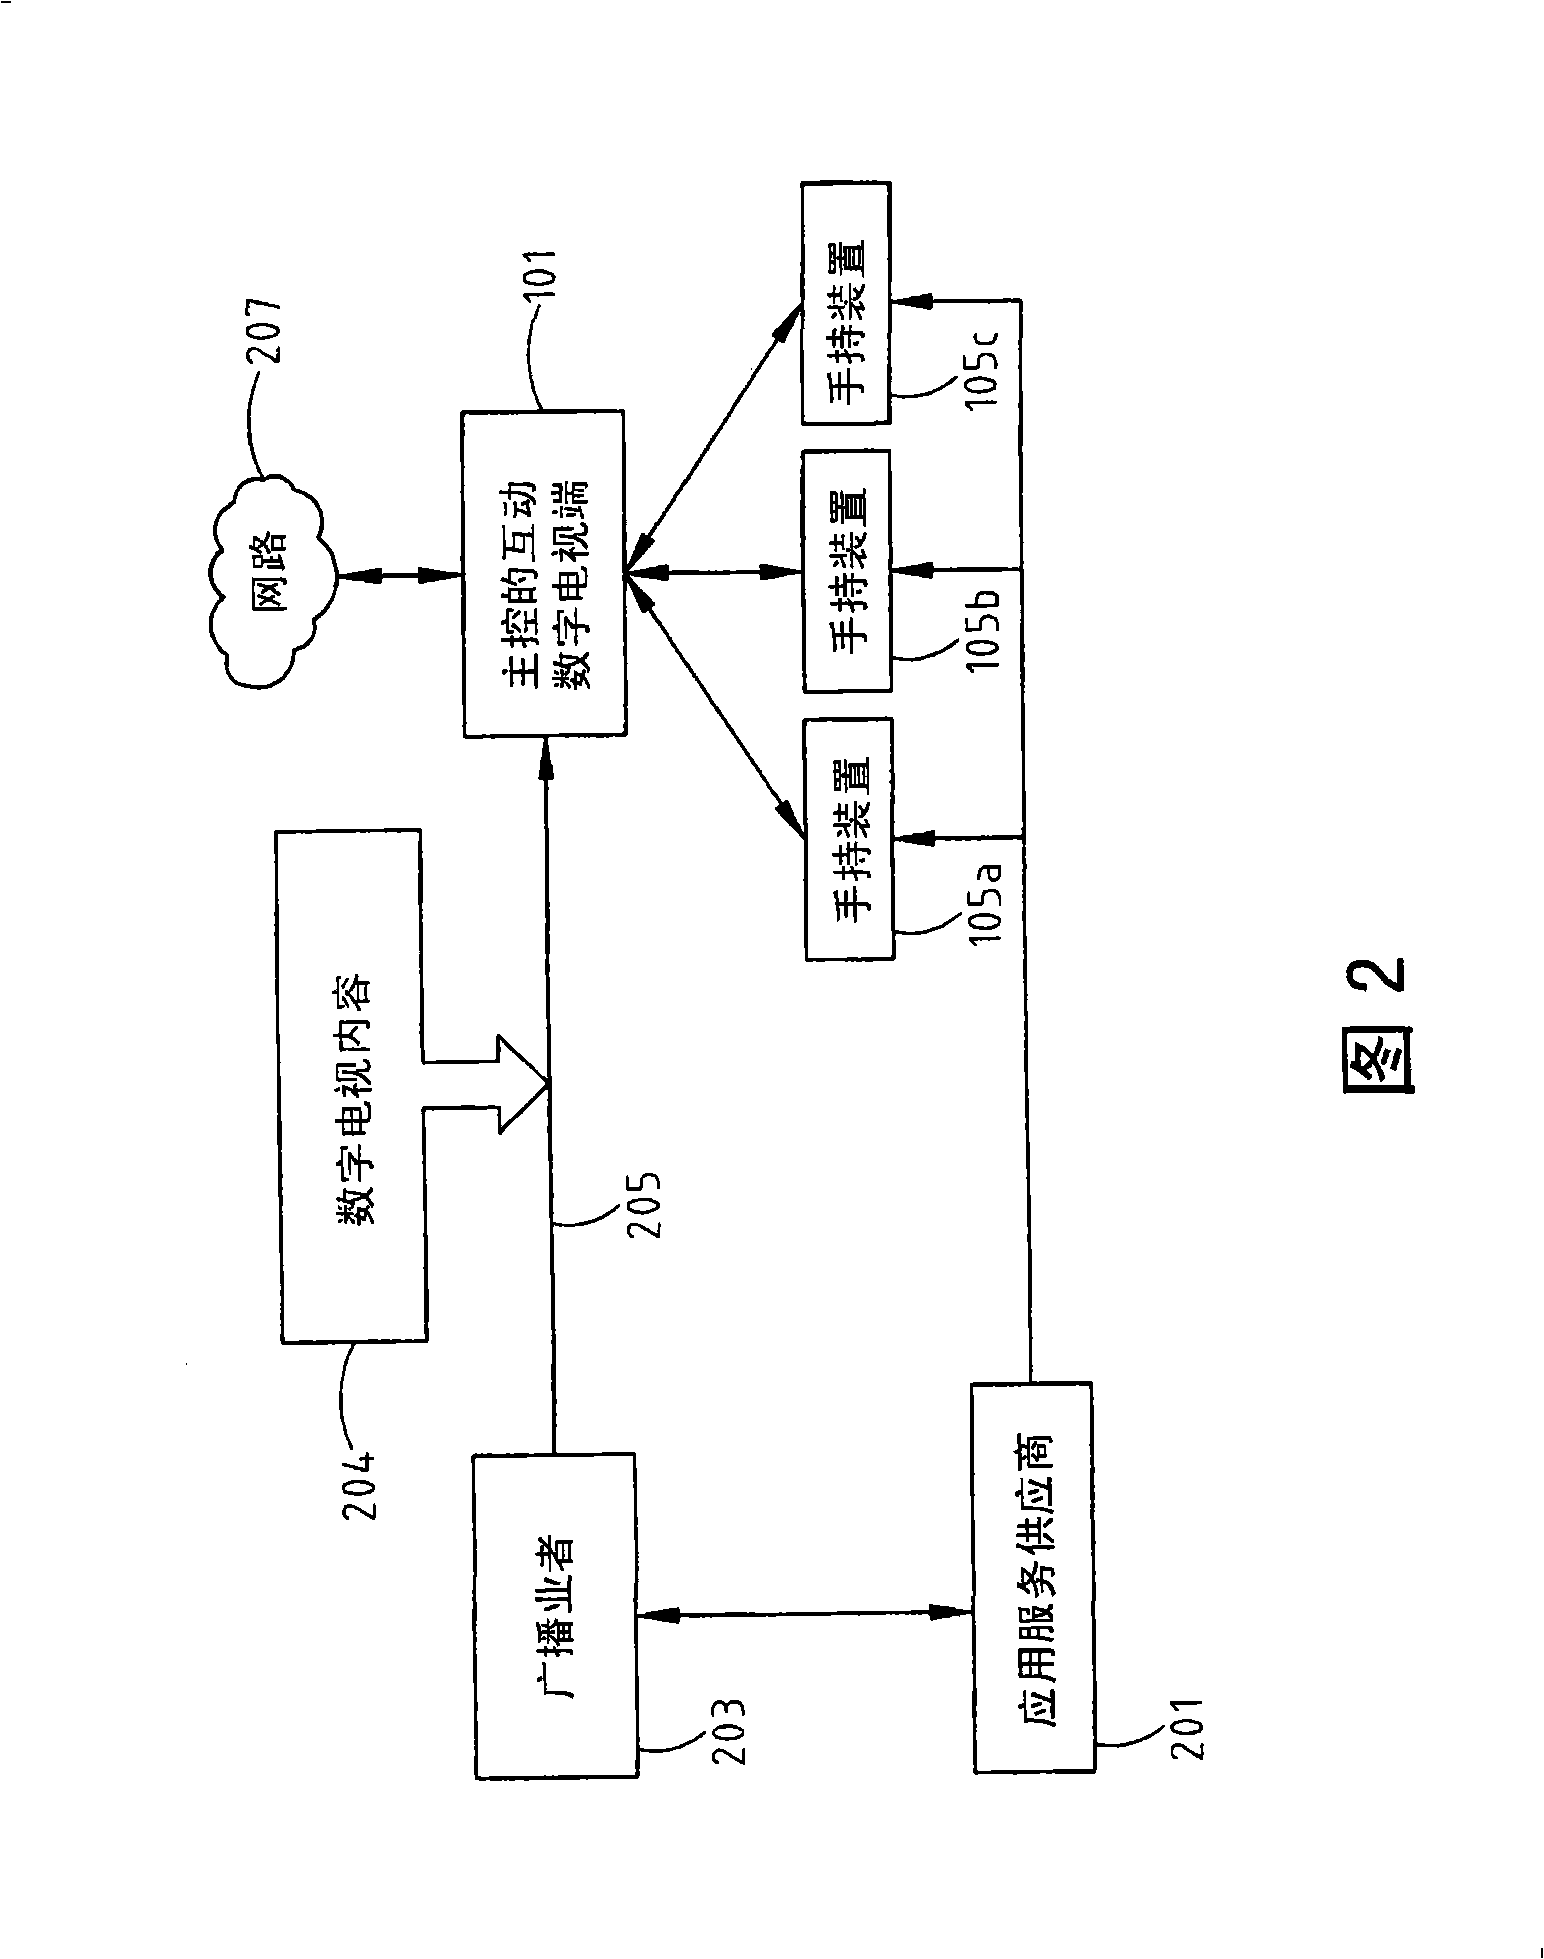 Double-screen interactive digital television system and method